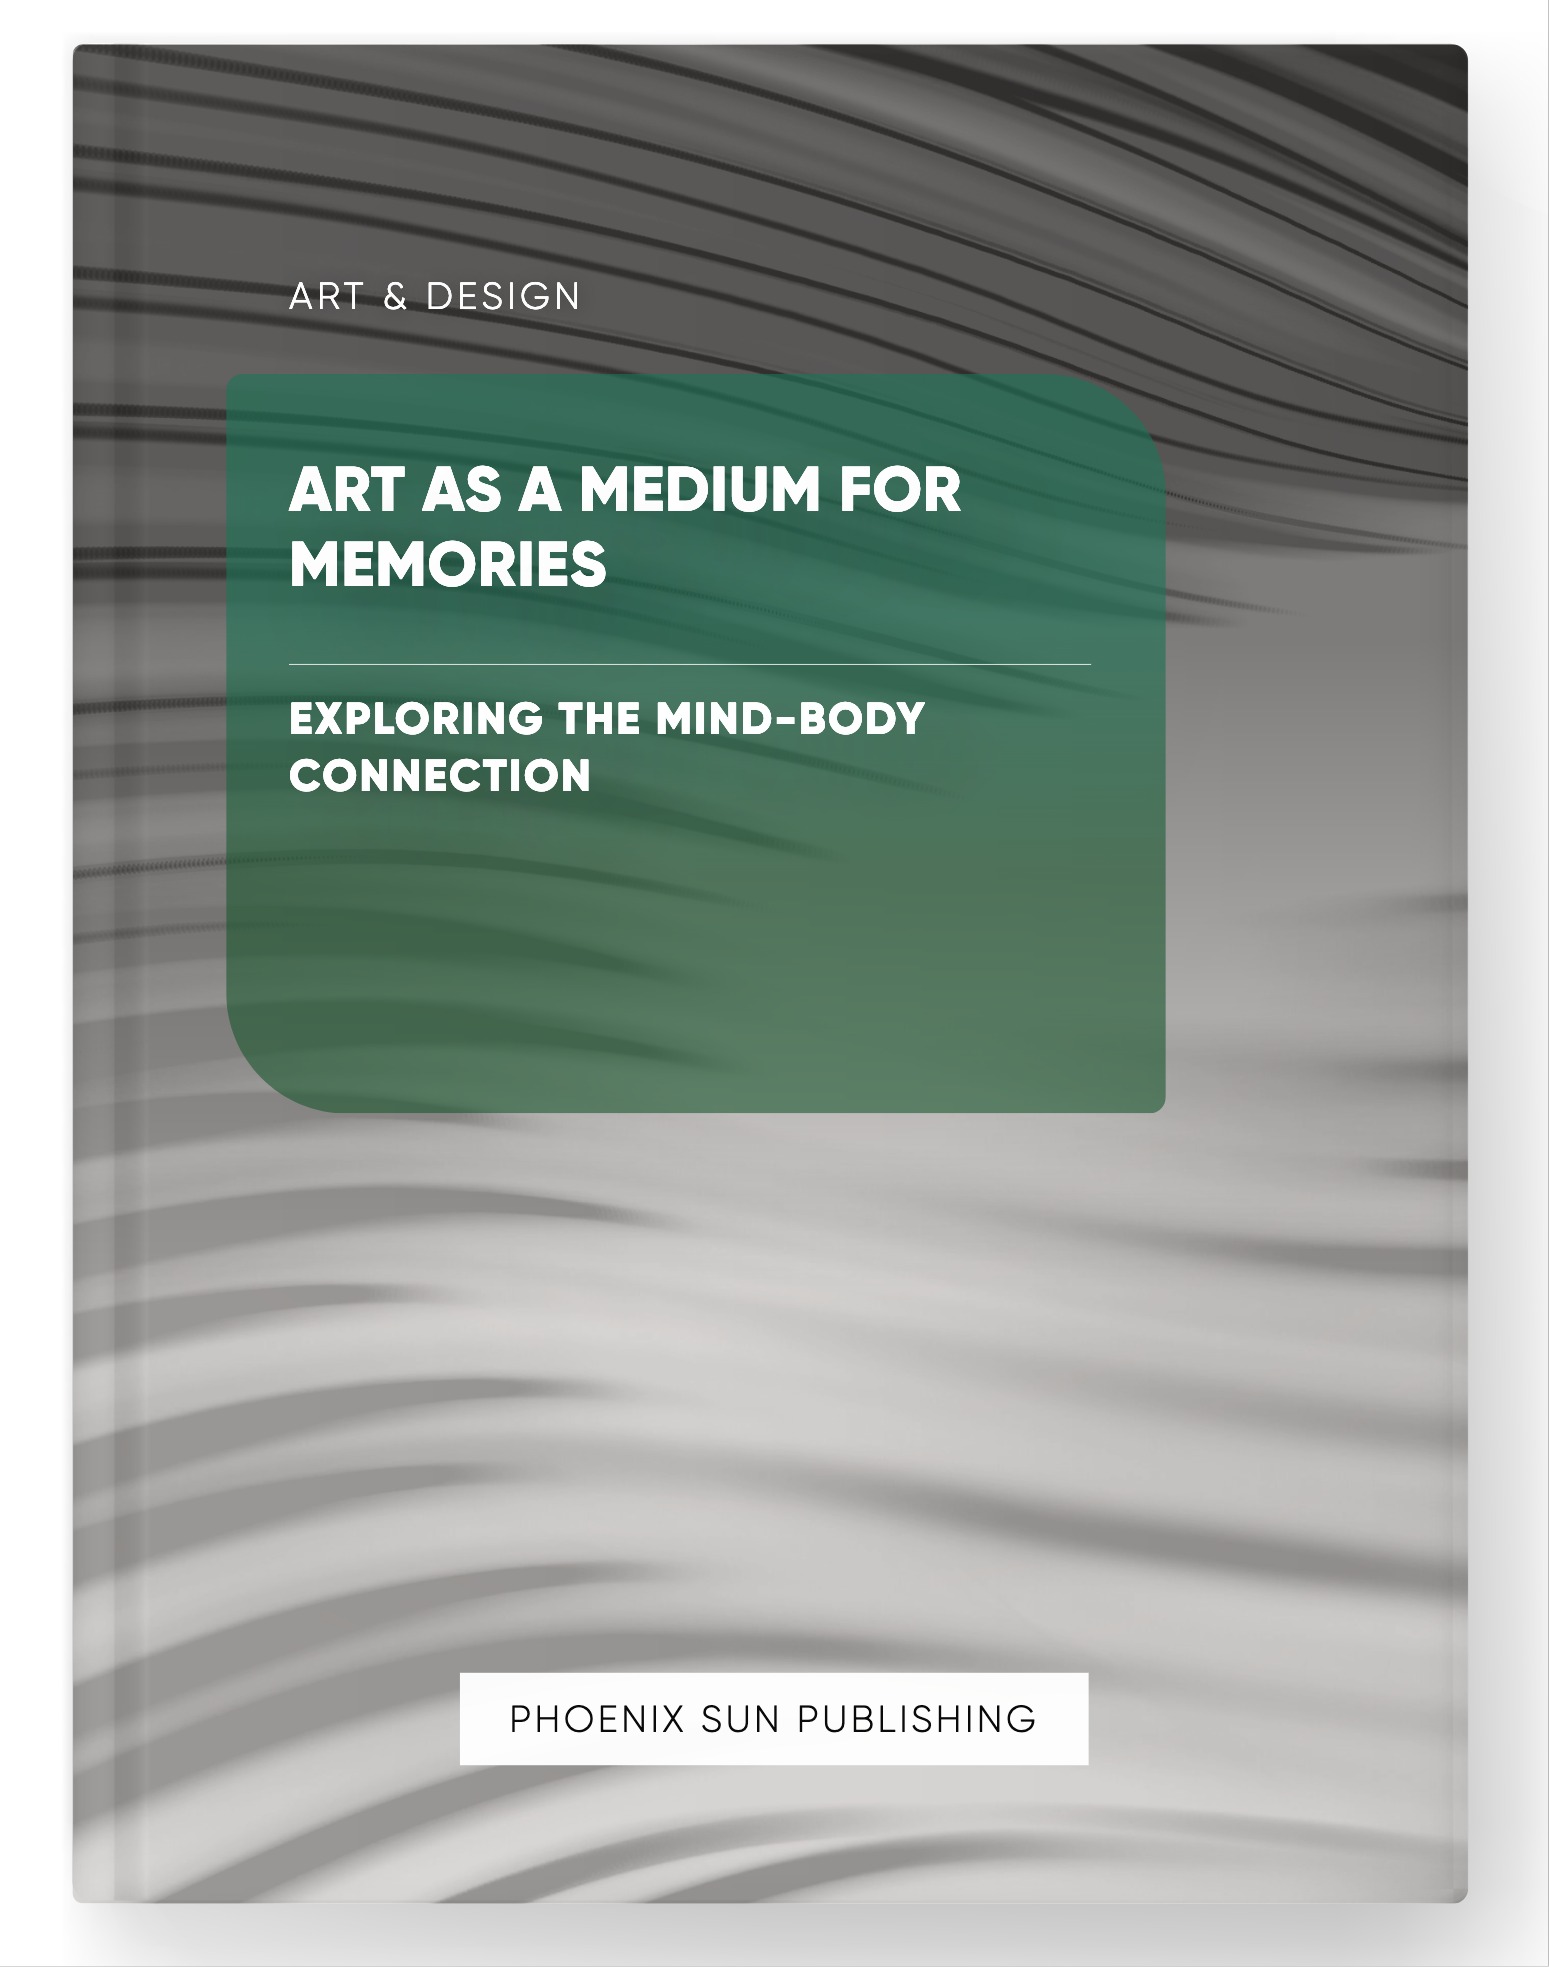 Art as a Medium for Memories – Exploring the Mind-Body Connection